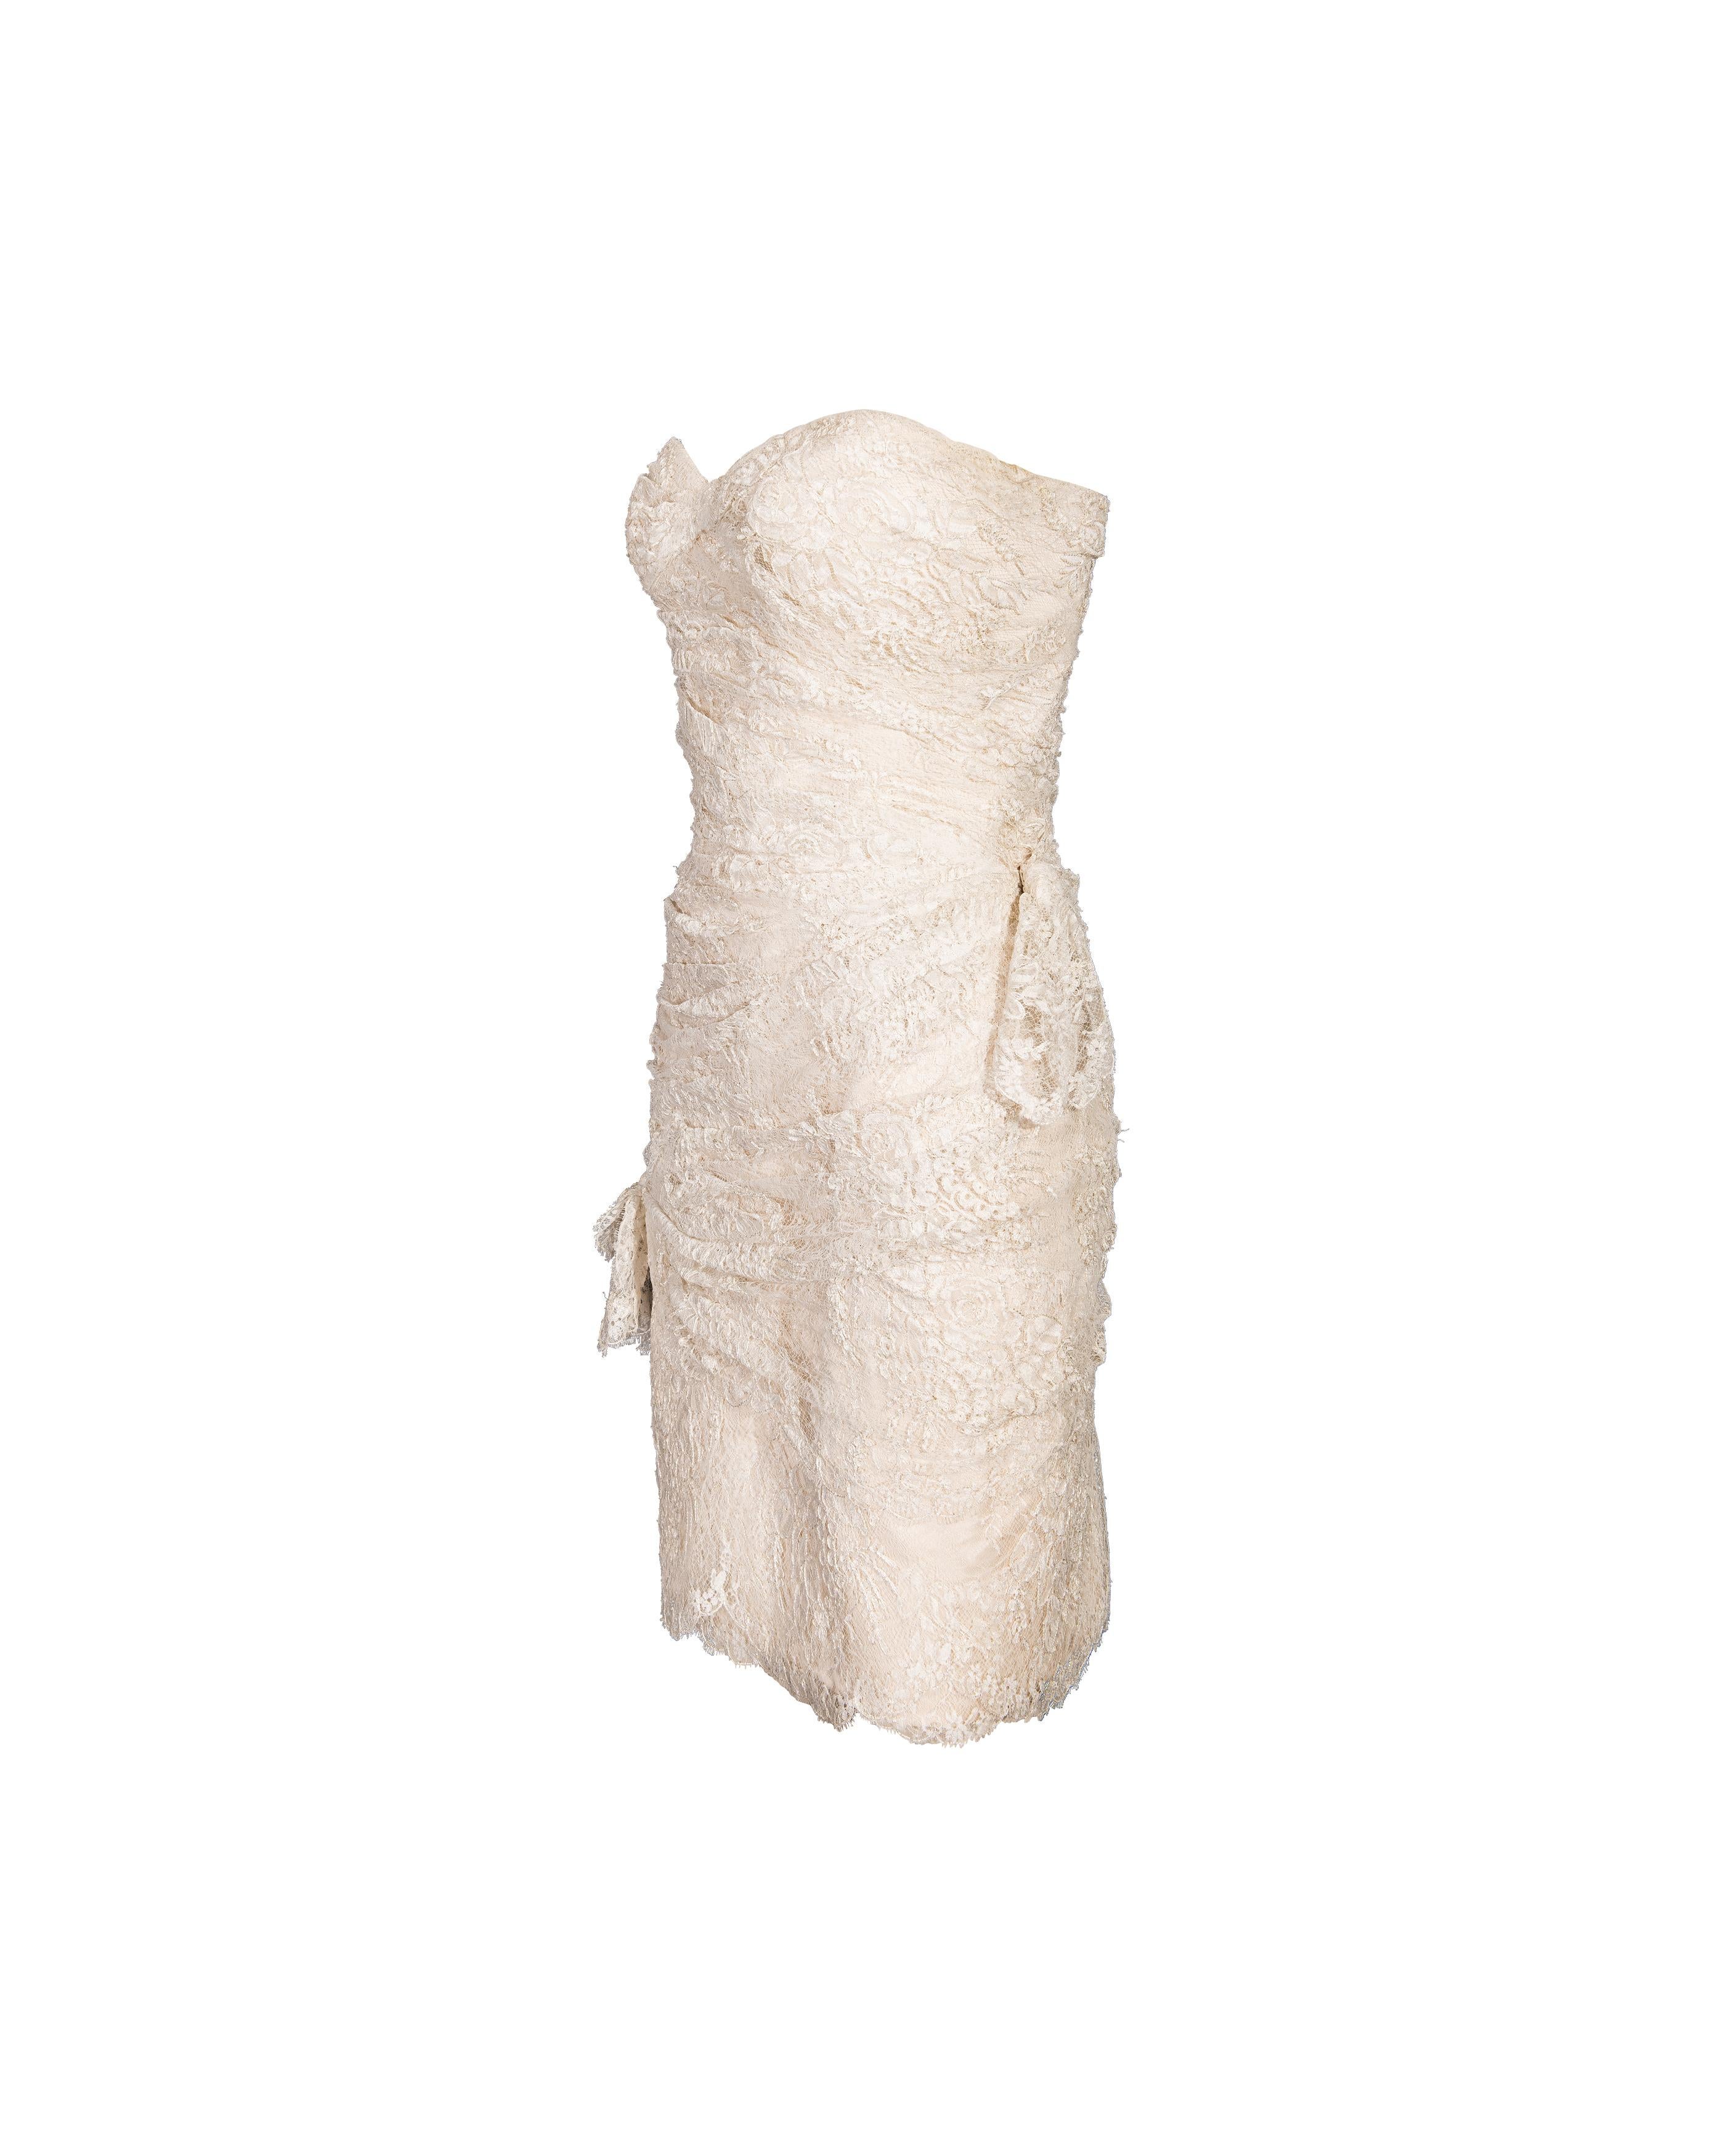 1970's Emanuel Ungaro ecru strapless lace sheath mini dress. Fitted strapless mini dress with gathered, draped lace throughout and nude lining. Small bow details. Concealed back zip closure. This piece has been taken to professional couture cleaner